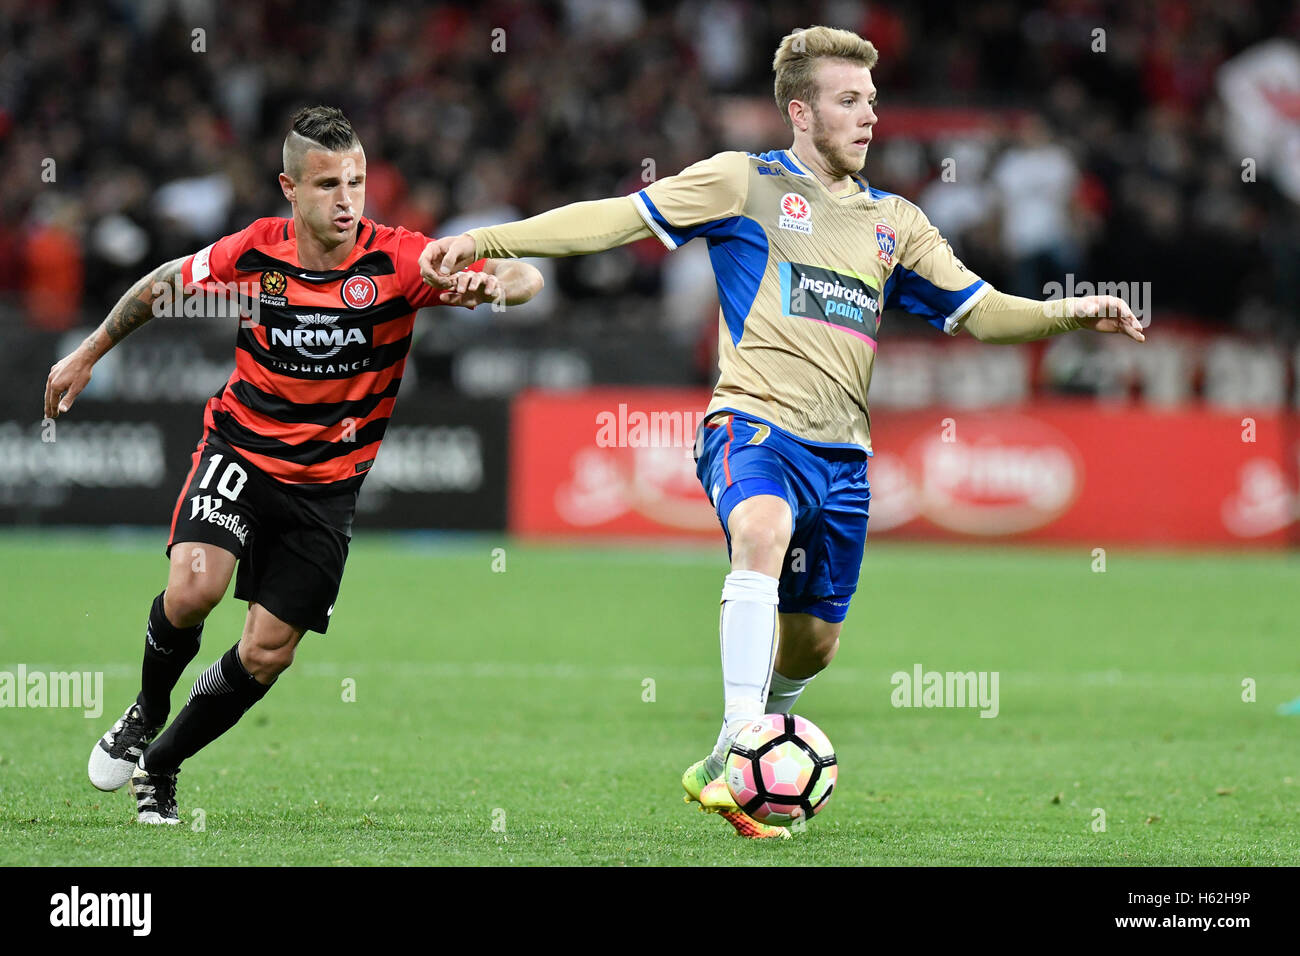 Spotless Stadium, Sydney, Australia. 23rd Oct, 2016. Hyundai A-League Football. Western Sydney Wanderers versus Newcastle Jets. Jets midfielder Andrew Hoole is chased down by Wanderers midfielder Nicolas Martine. The game ended in a 2-2 draw. Credit:  Action Plus Sports/Alamy Live News Stock Photo